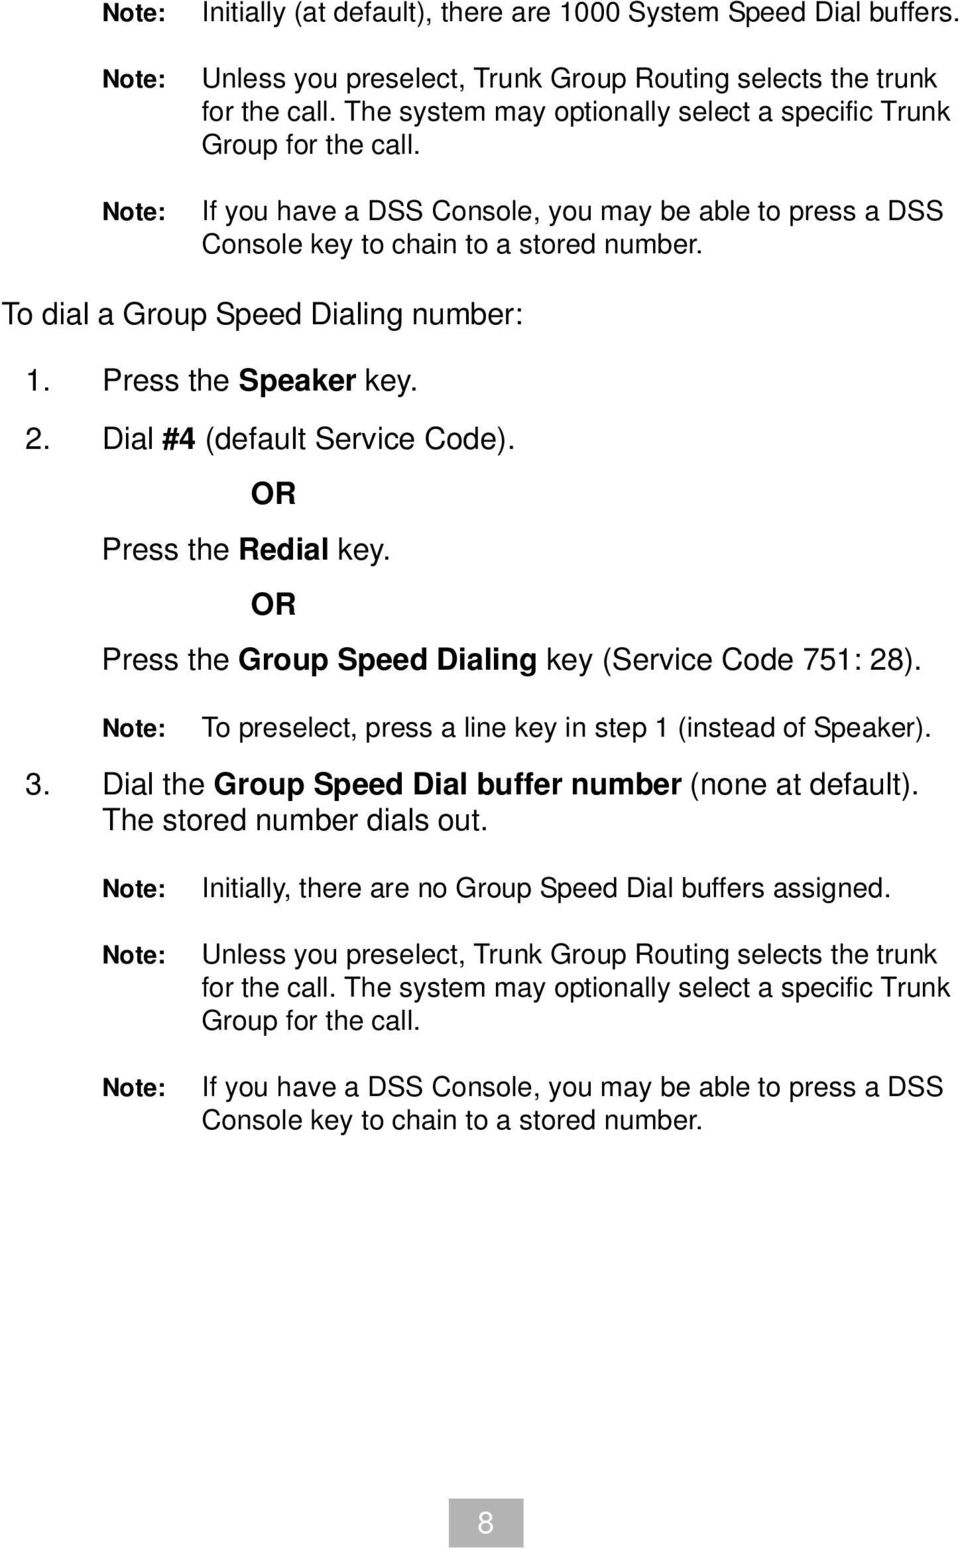 To dial a Group Speed Dialing number: 1. Press the Speaker key. 2. Dial #4 (default Service Code). OR Press the Redial key. OR Press the Group Speed Dialing key (Service Code 751: 28).